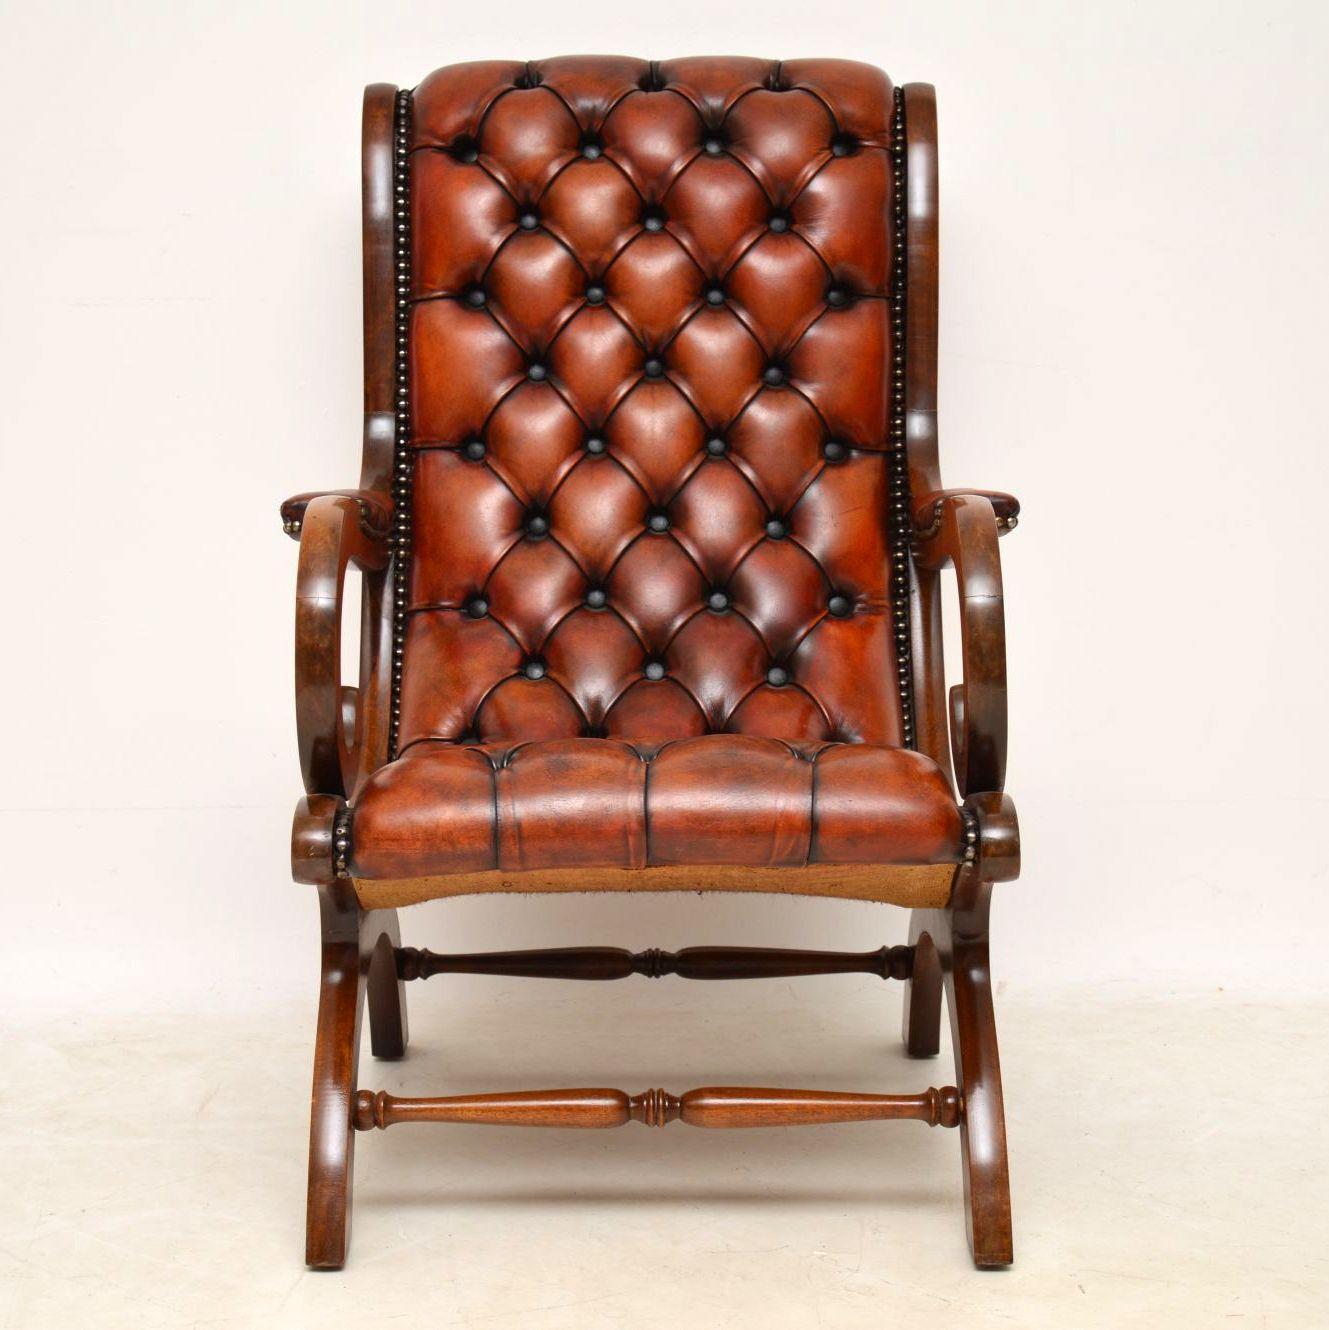 I always find these antique leather slipper armchairs very comfortable due to the shape of the seat and back. This one has a lovely look with original deep buttoned leather, which has a great color and loads of character. It’s hand tacked all over